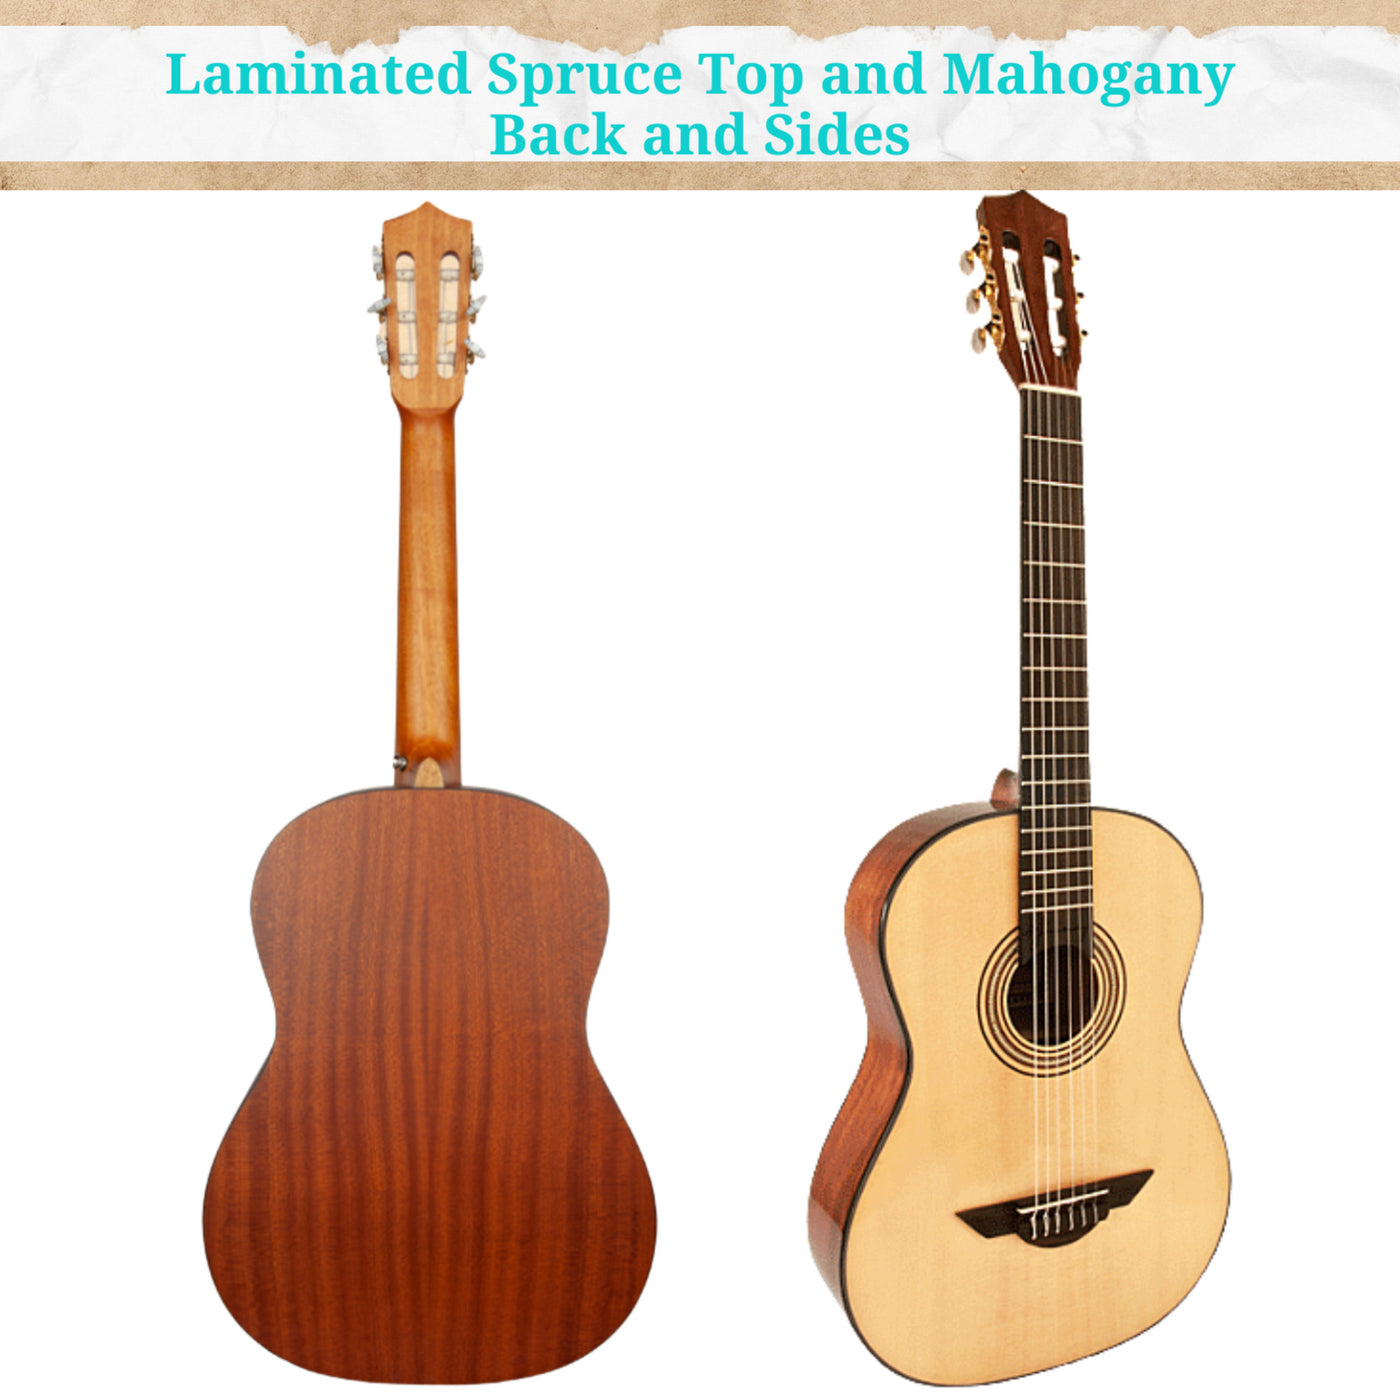 H. Jimenez LG2 El Artista Nylon Classical Guitar, with Laminated Spruce Top and Mahogany Back and Sides, Natural